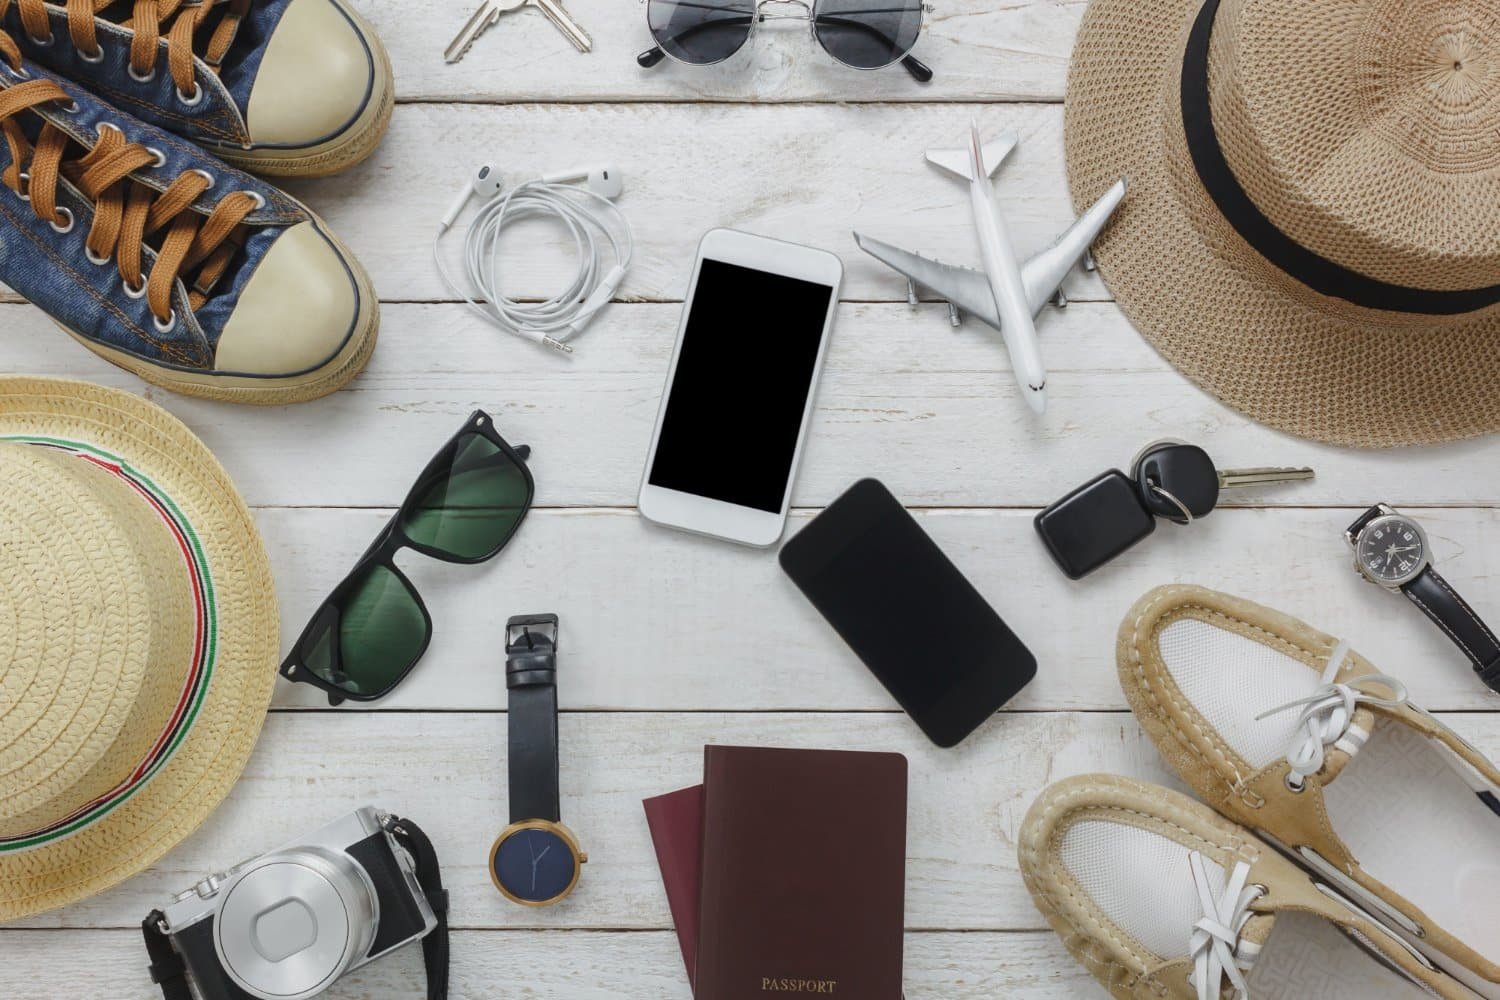 Travel Gadgets Every Explorer Should Have in Their Arsenal